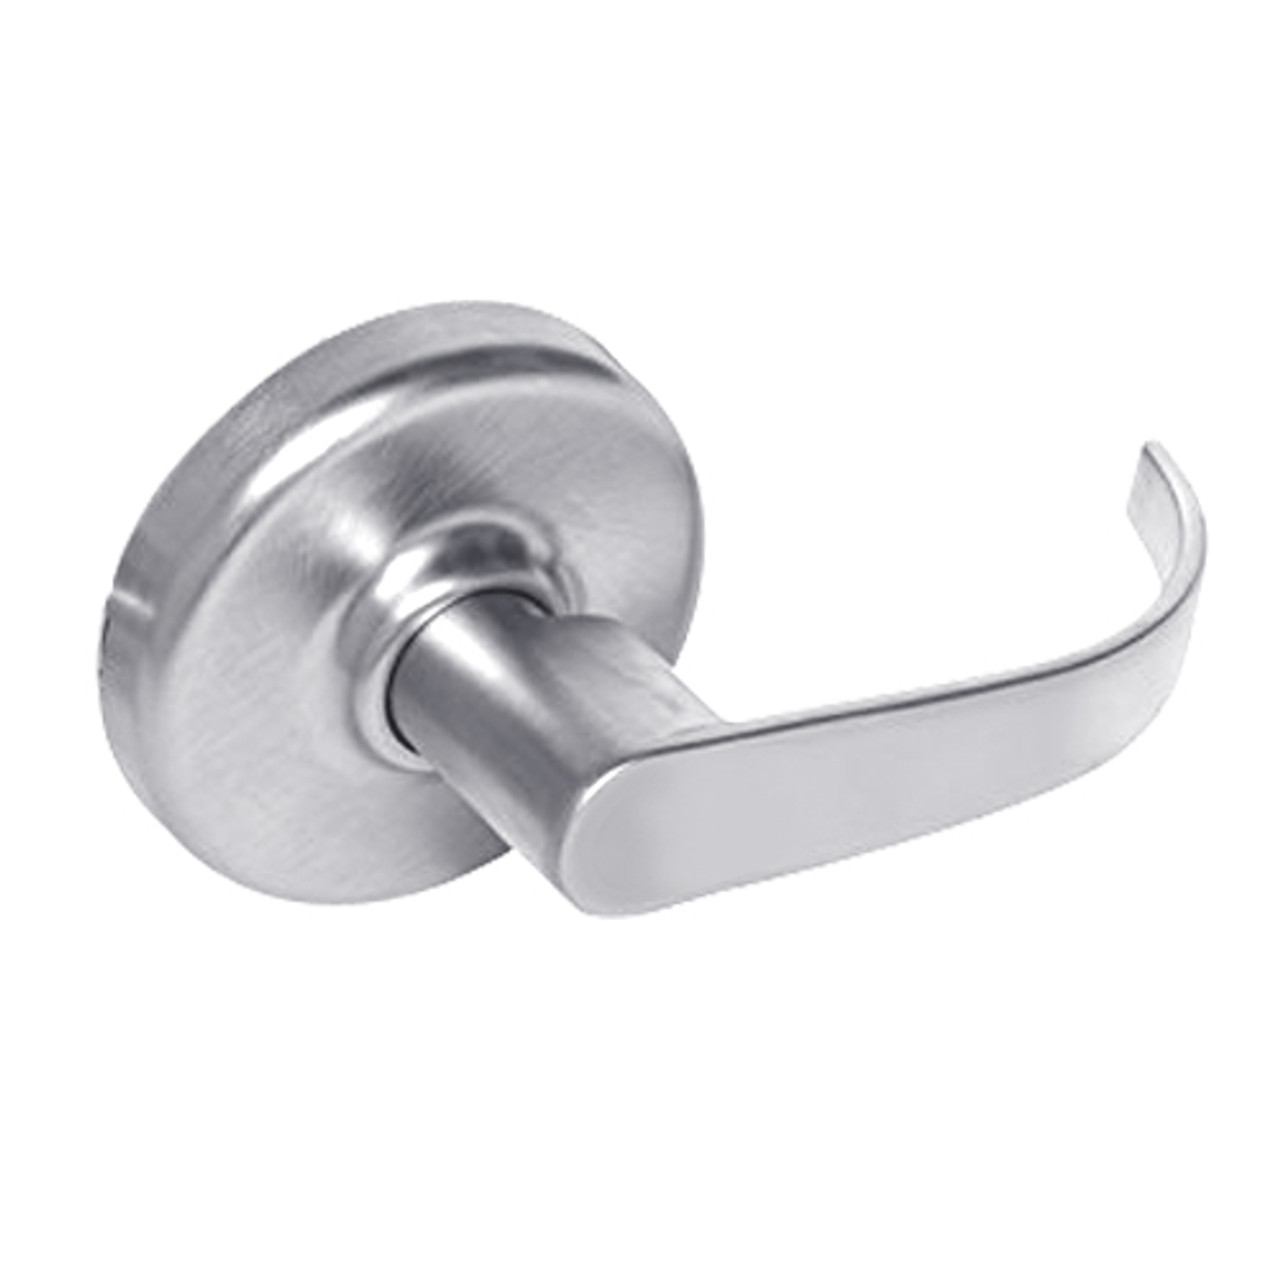 CL3370-PZD-625 Corbin CL3300 Series Extra Heavy Duty Full Dummy Cylindrical Locksets with Princeton Lever in Bright Chrome Finish